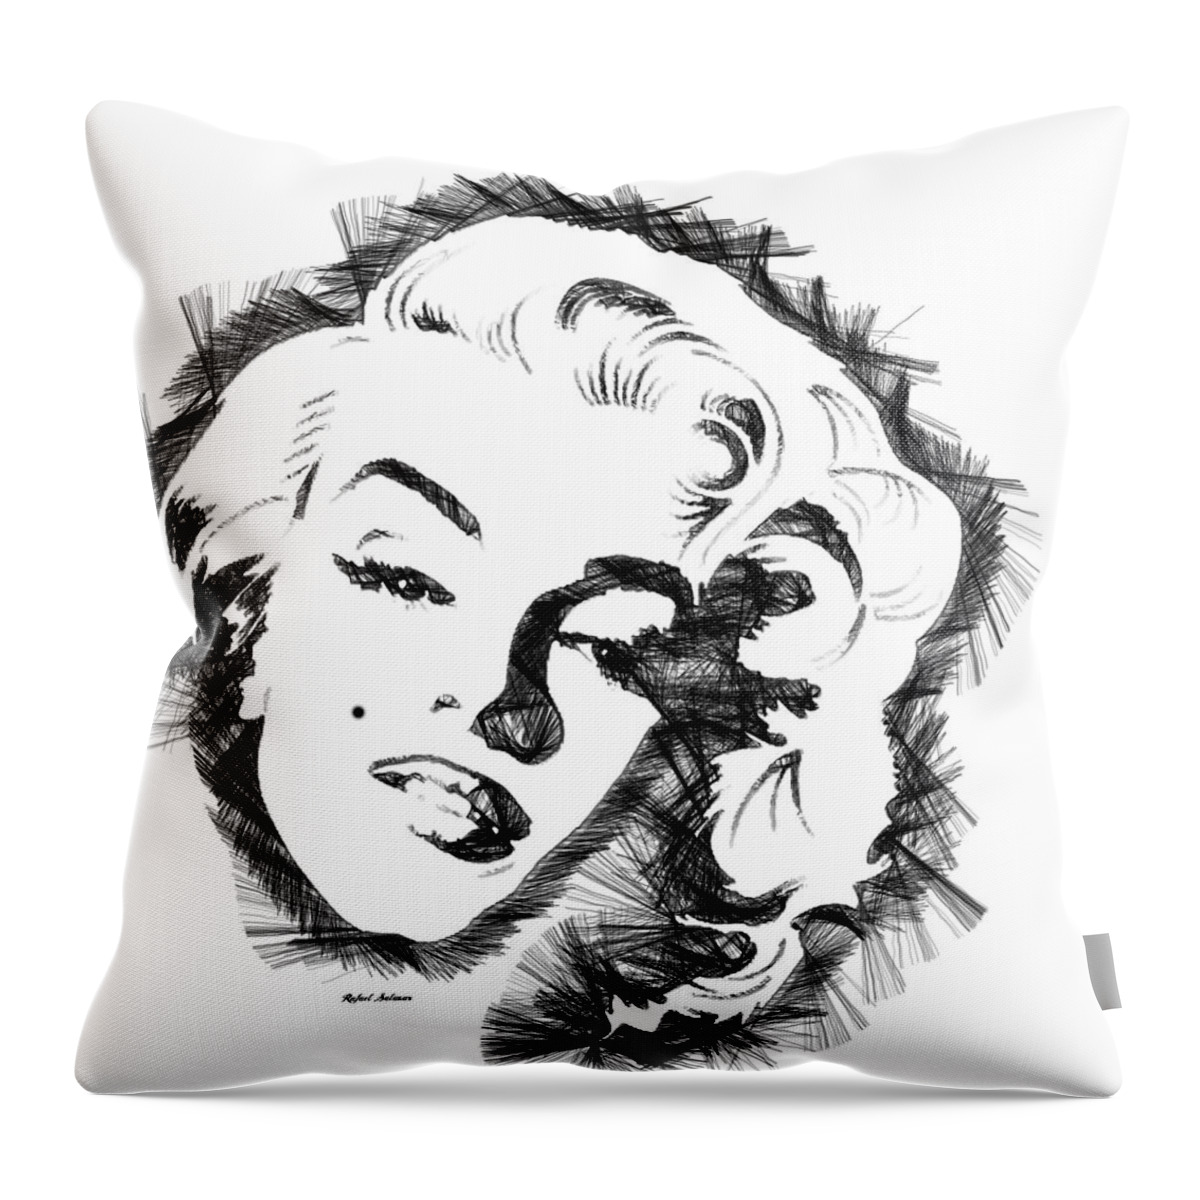 Marilyn Monroe Throw Pillow featuring the digital art Marilyn Monroe Sketch in Black and White by Rafael Salazar